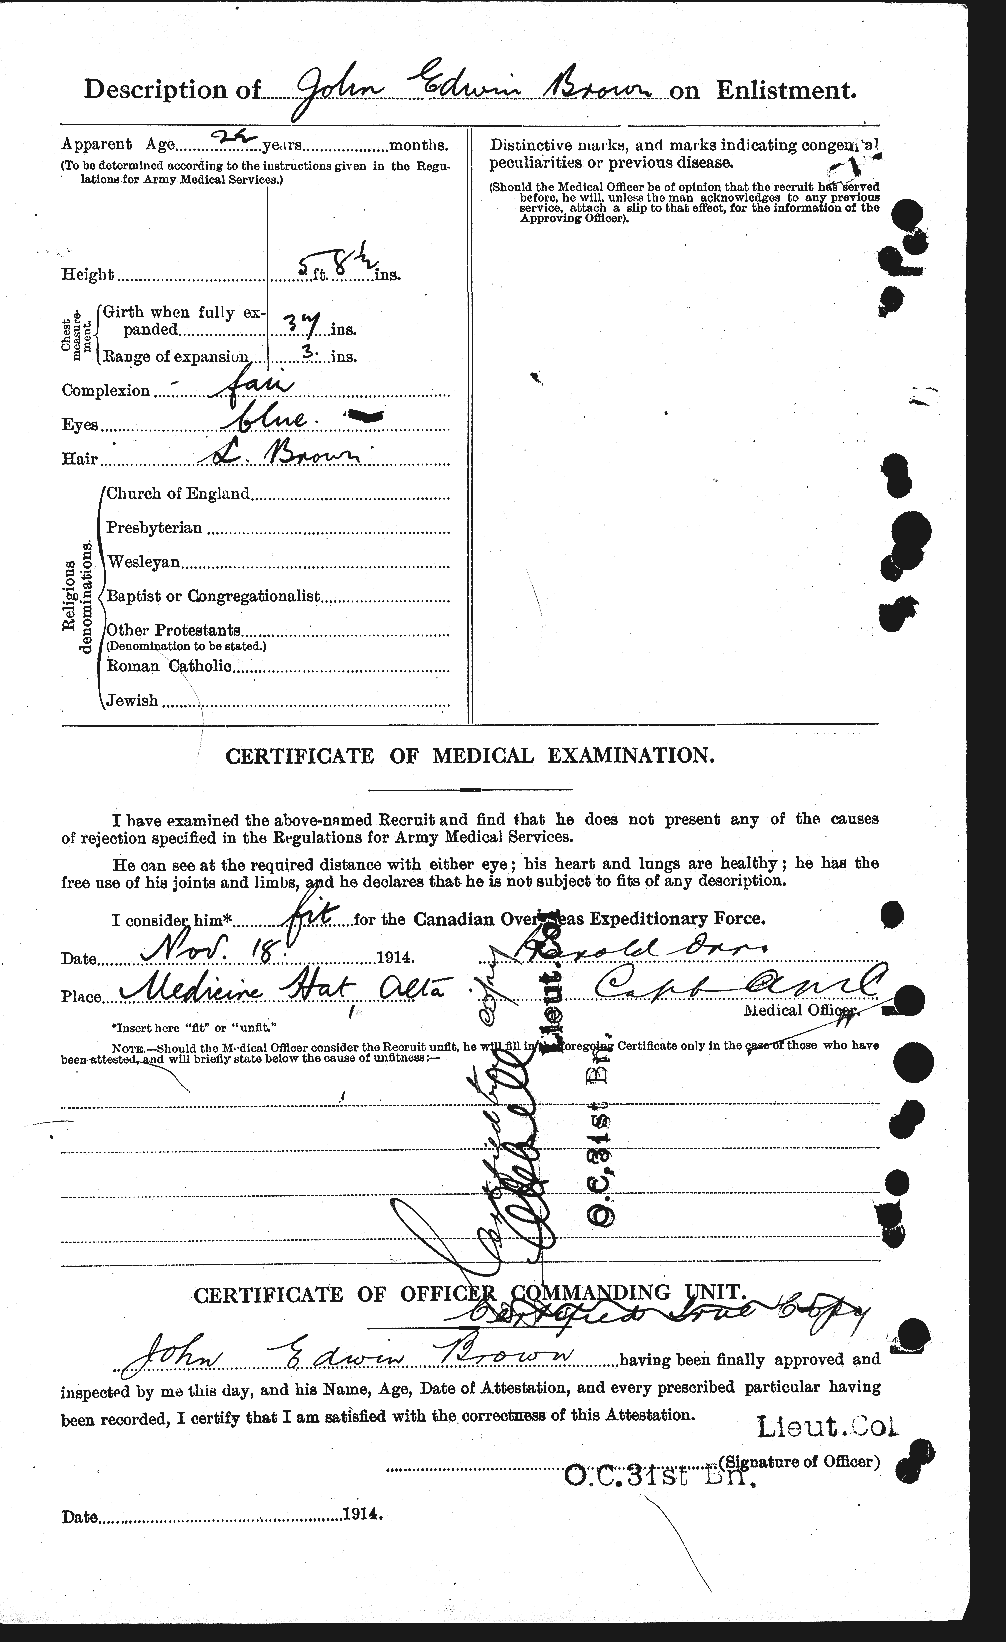 Personnel Records of the First World War - CEF 264591b